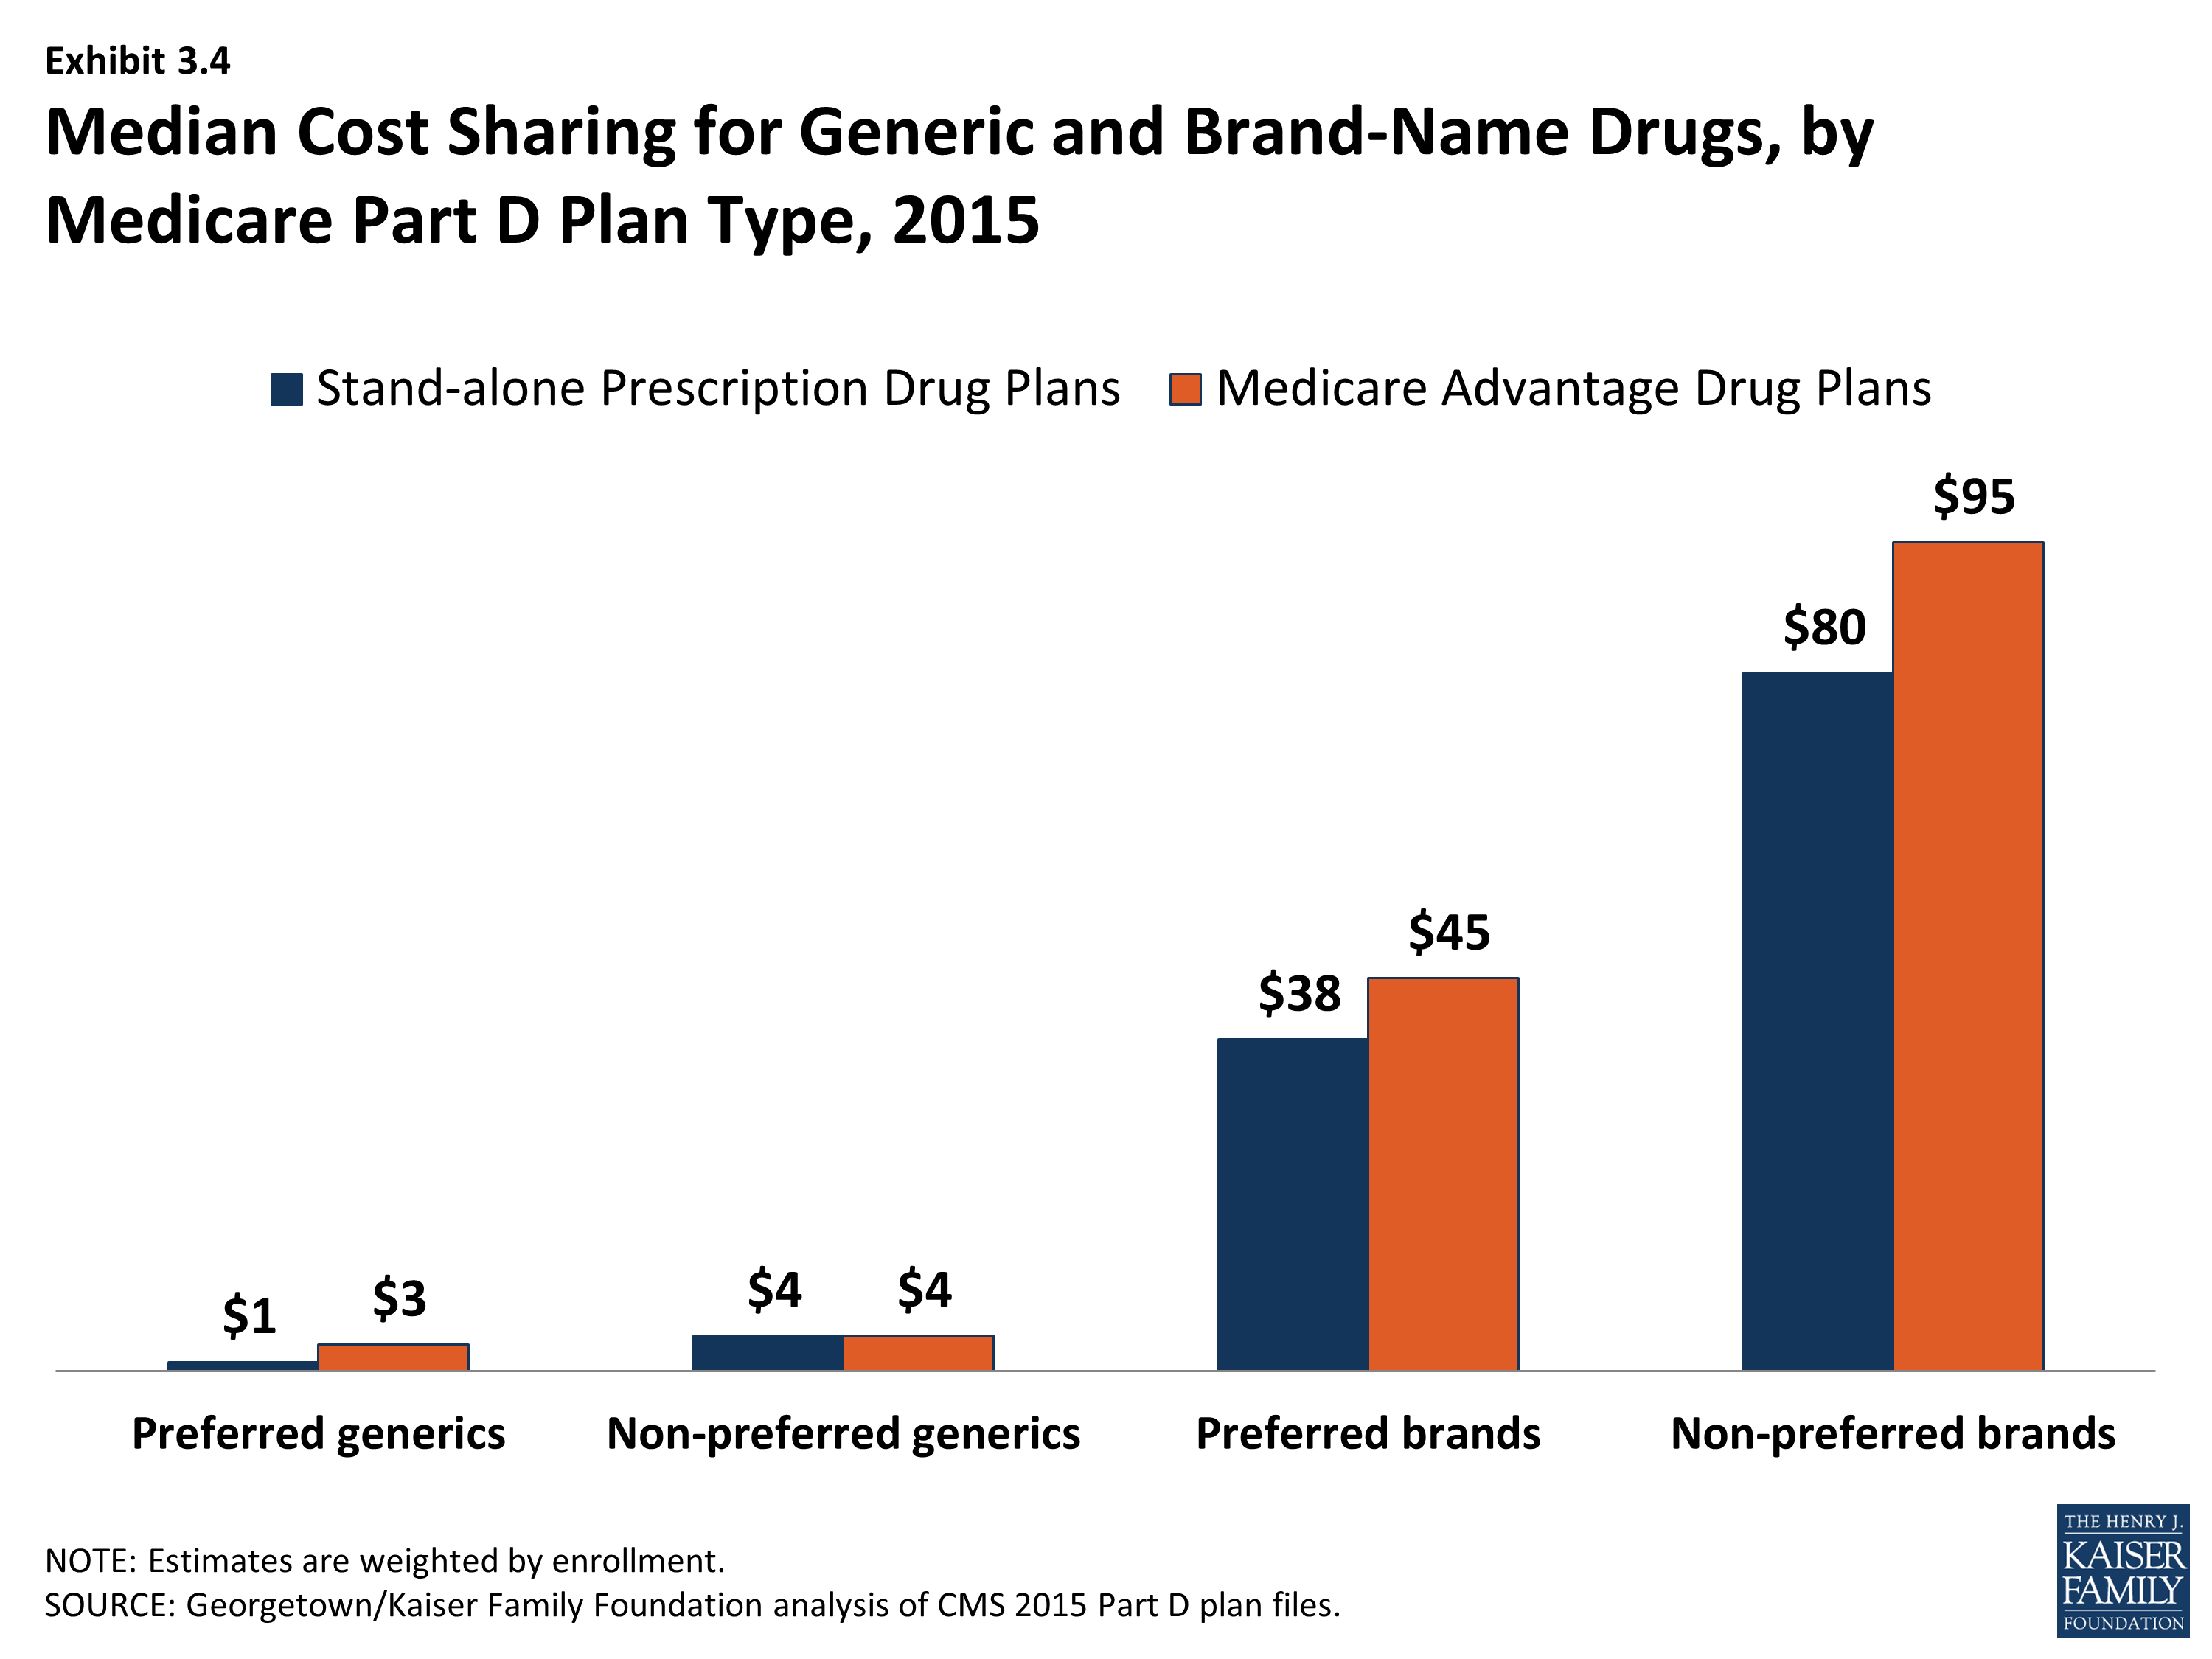 Medicare Part D At Ten Years – Section 5: Part D Performance